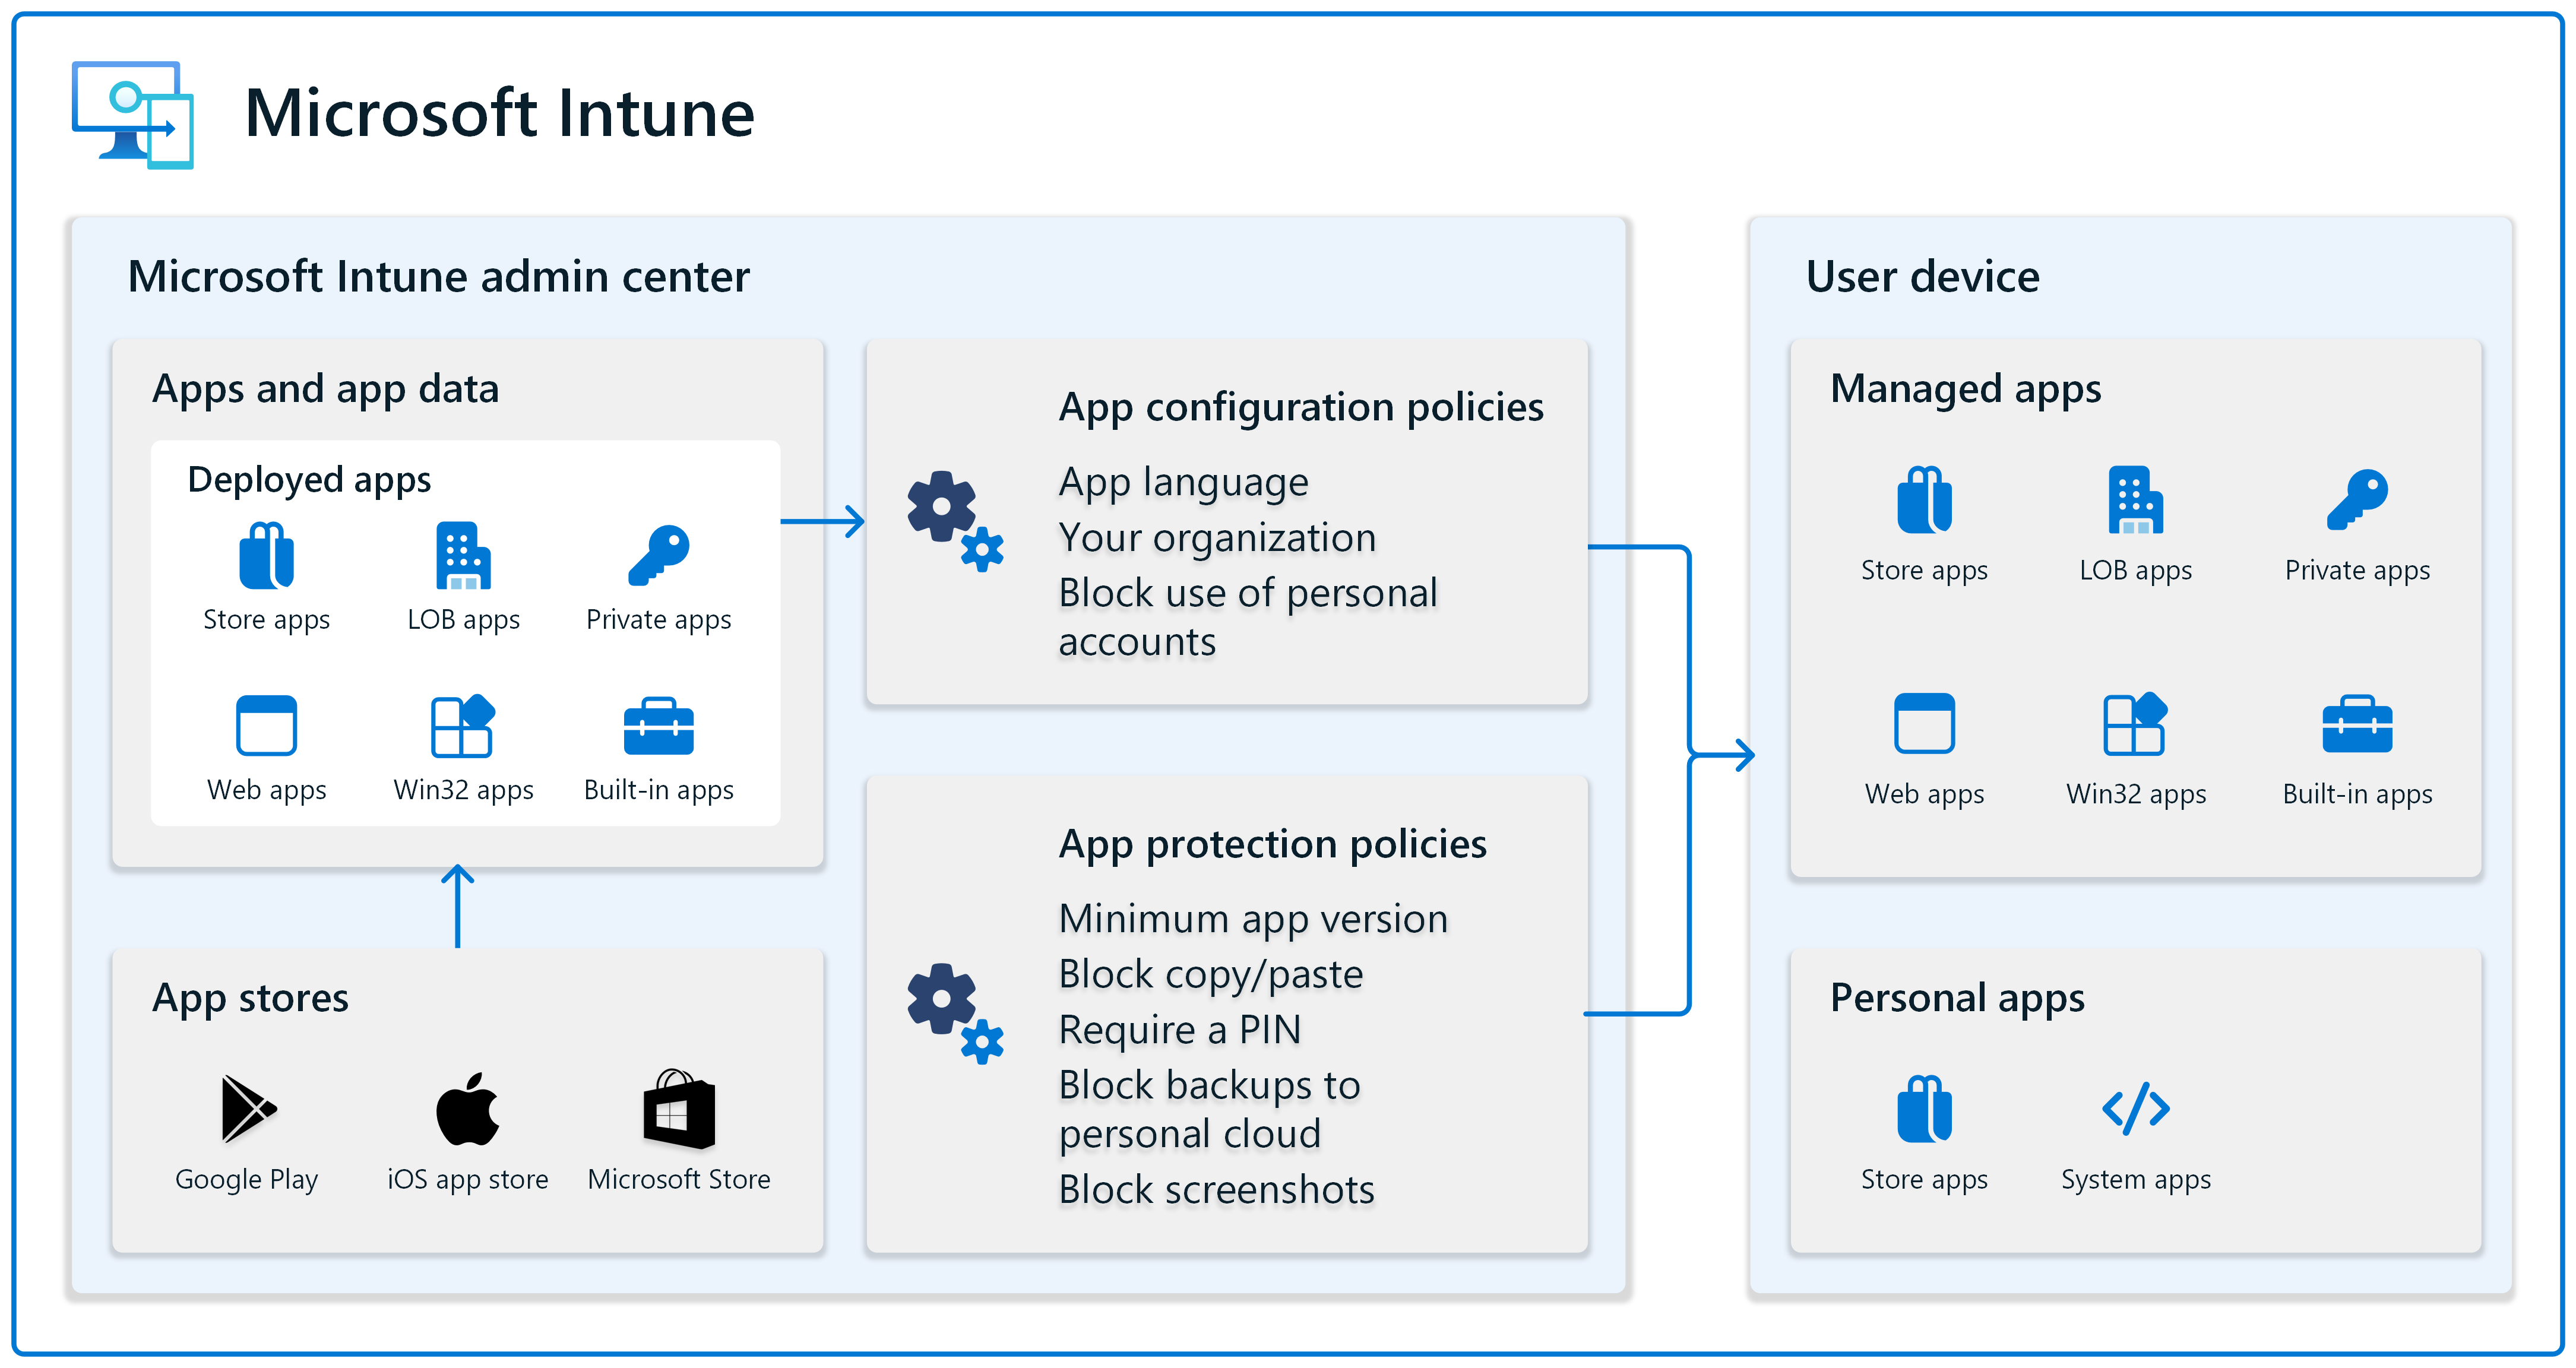 Diagram that shows app management in the Microsoft Intune admin center, including deploying apps, and using app configuration policies & app protection policies for managed apps & personal apps.